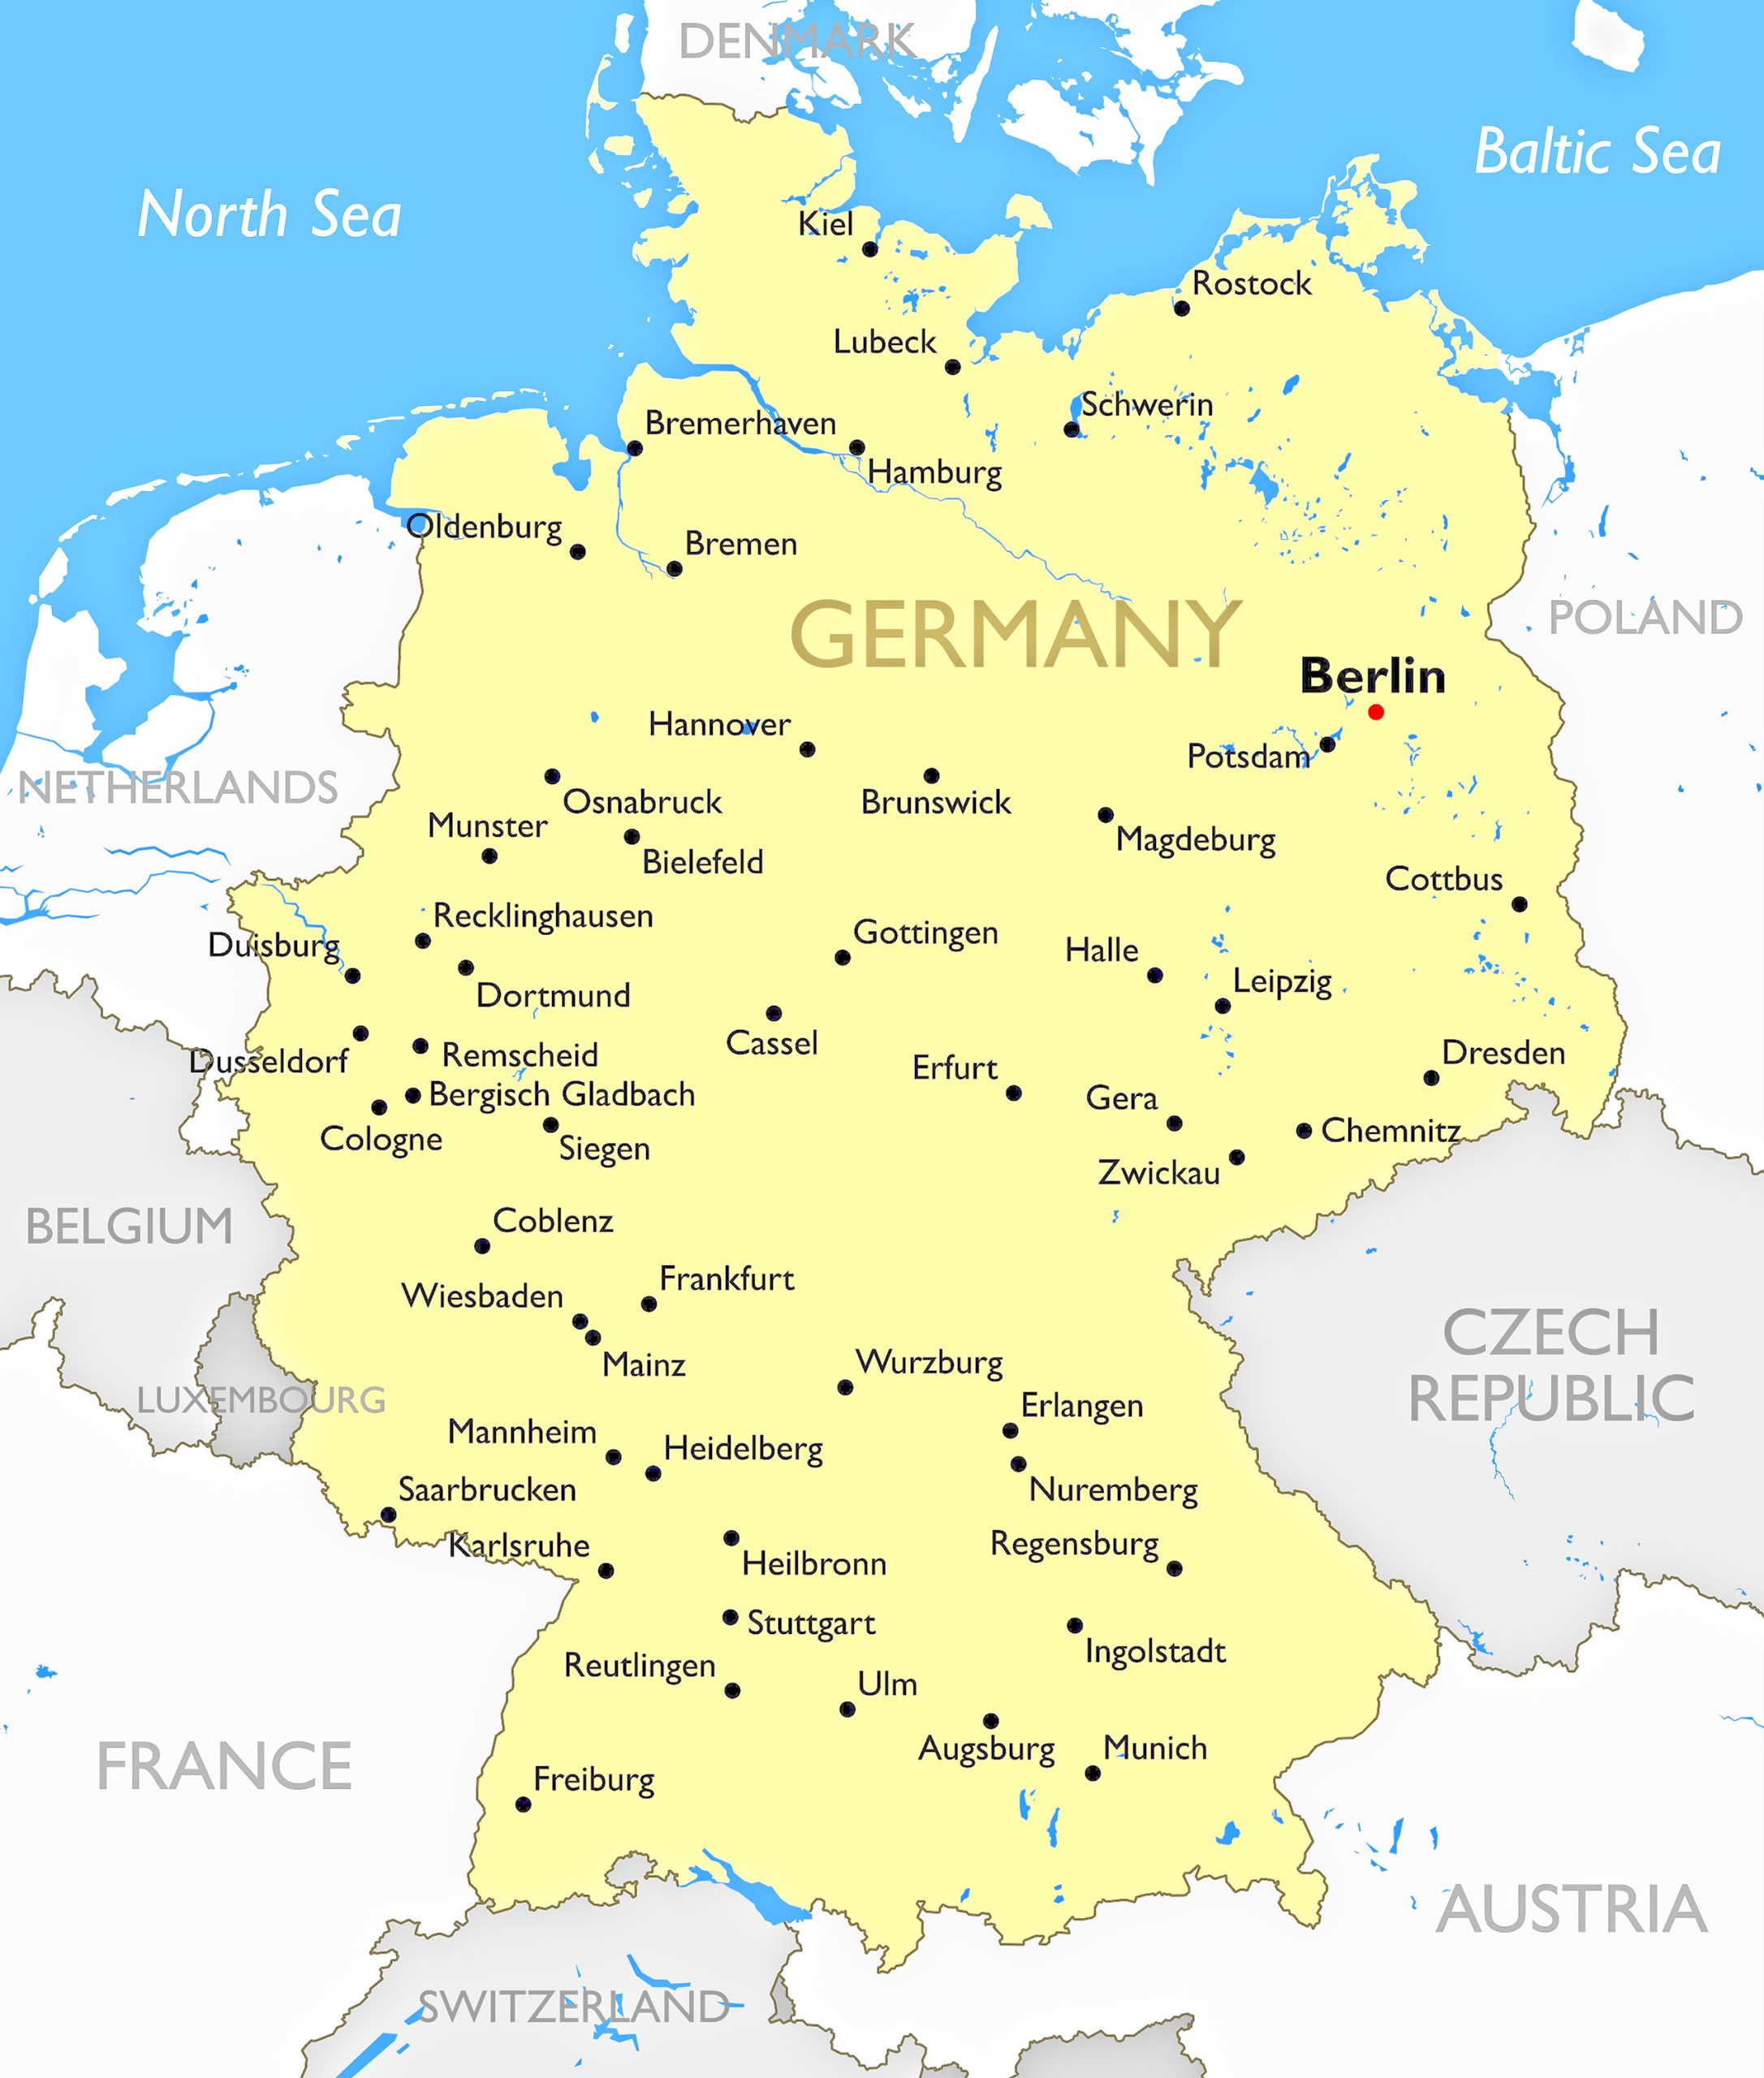 Germany Cities (Urban) Map